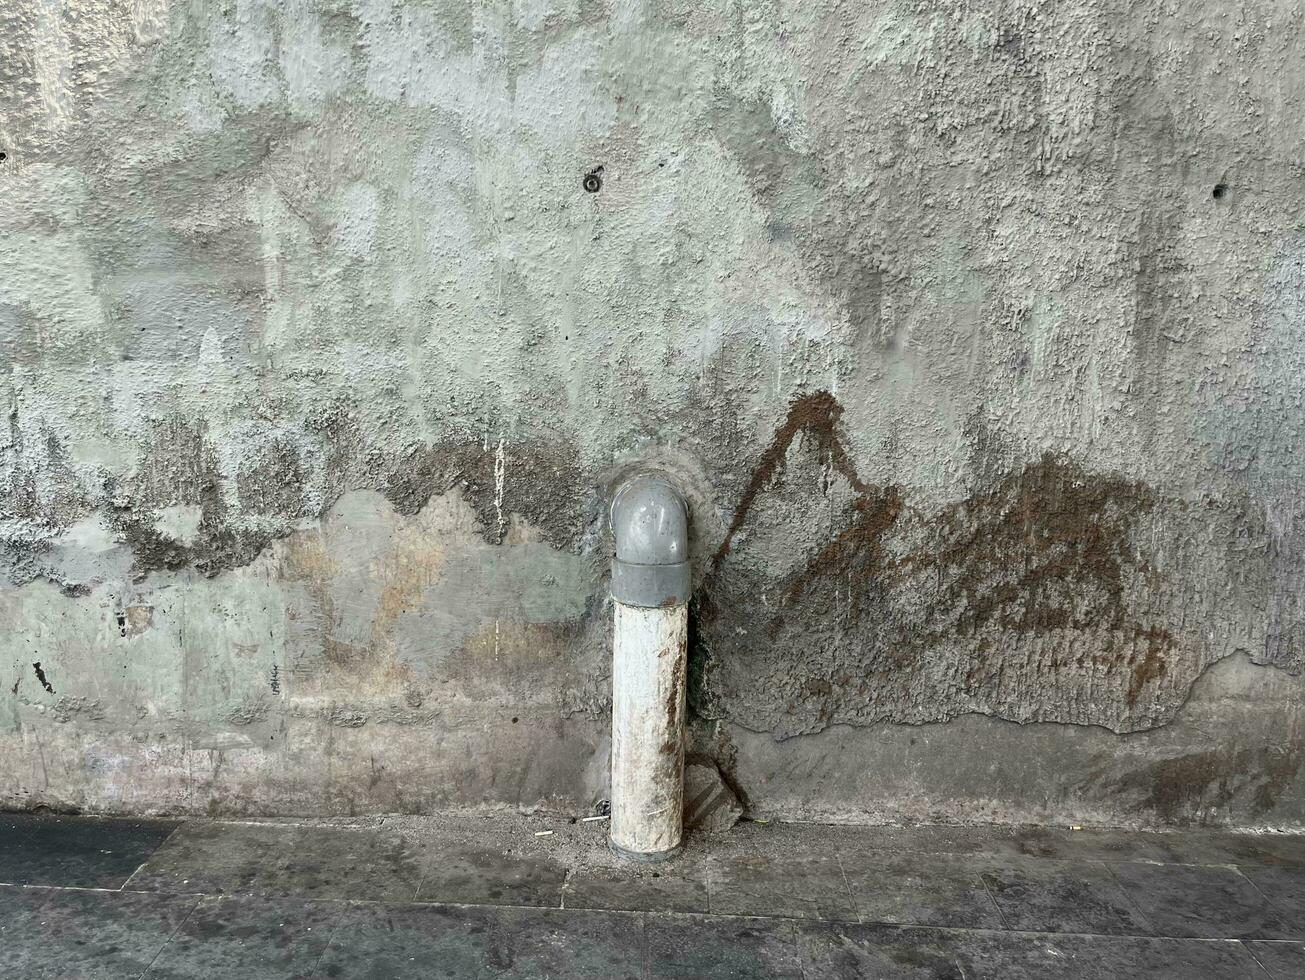 Unclean concrete wall outdoor with grungy textured stain isolated on horizontal ratio and water pipe going down to the ground object. photo